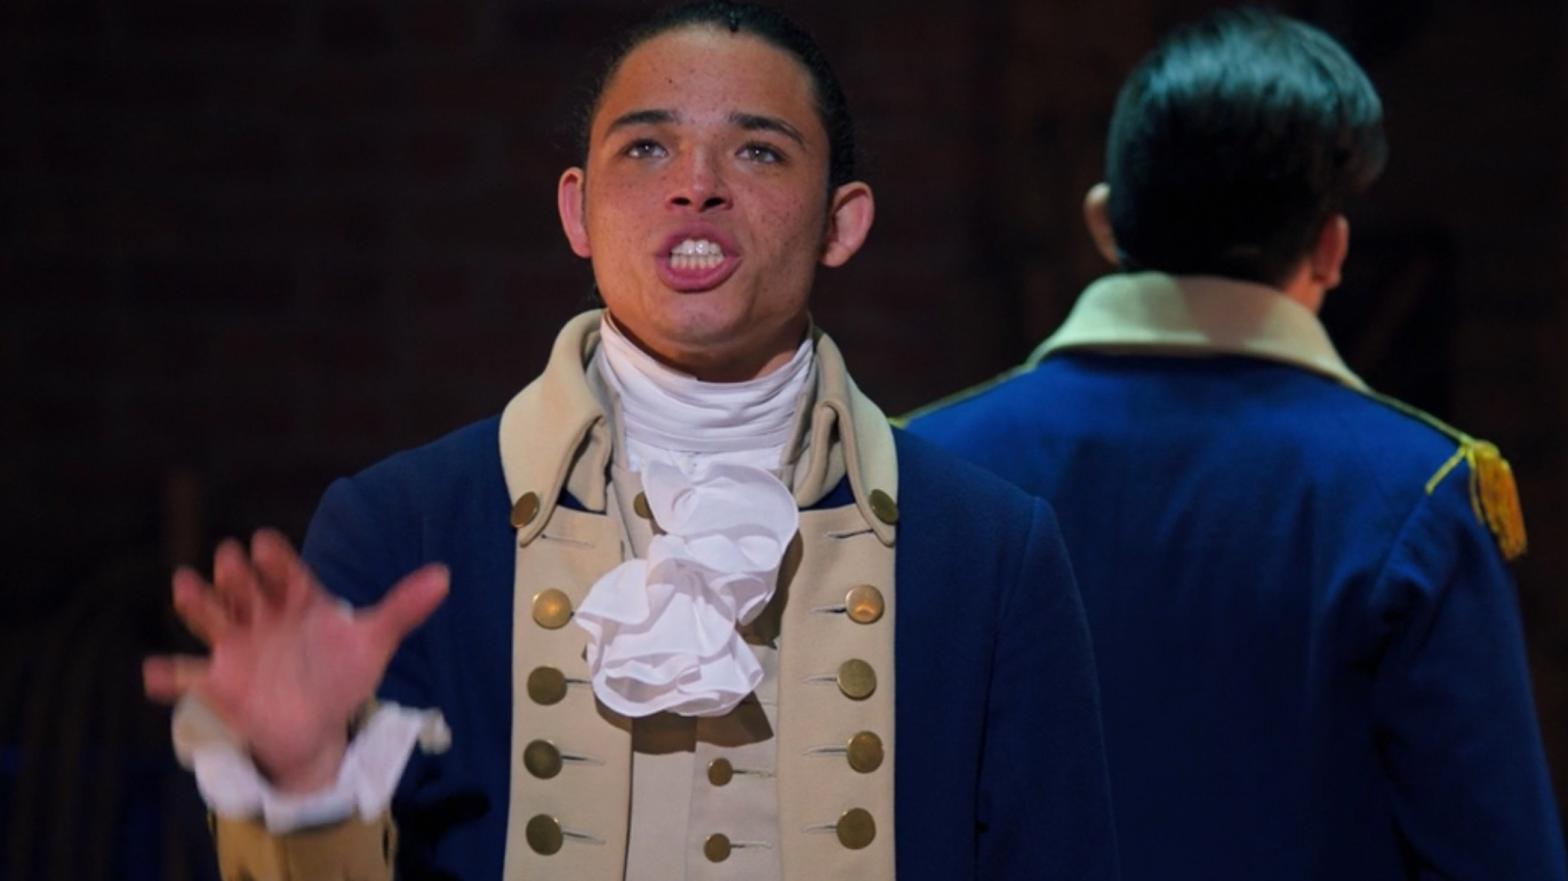 Anthony Ramos, seen here in Hamilton, may be starring in a new Transformers movie. (Screenshot: Disney+)